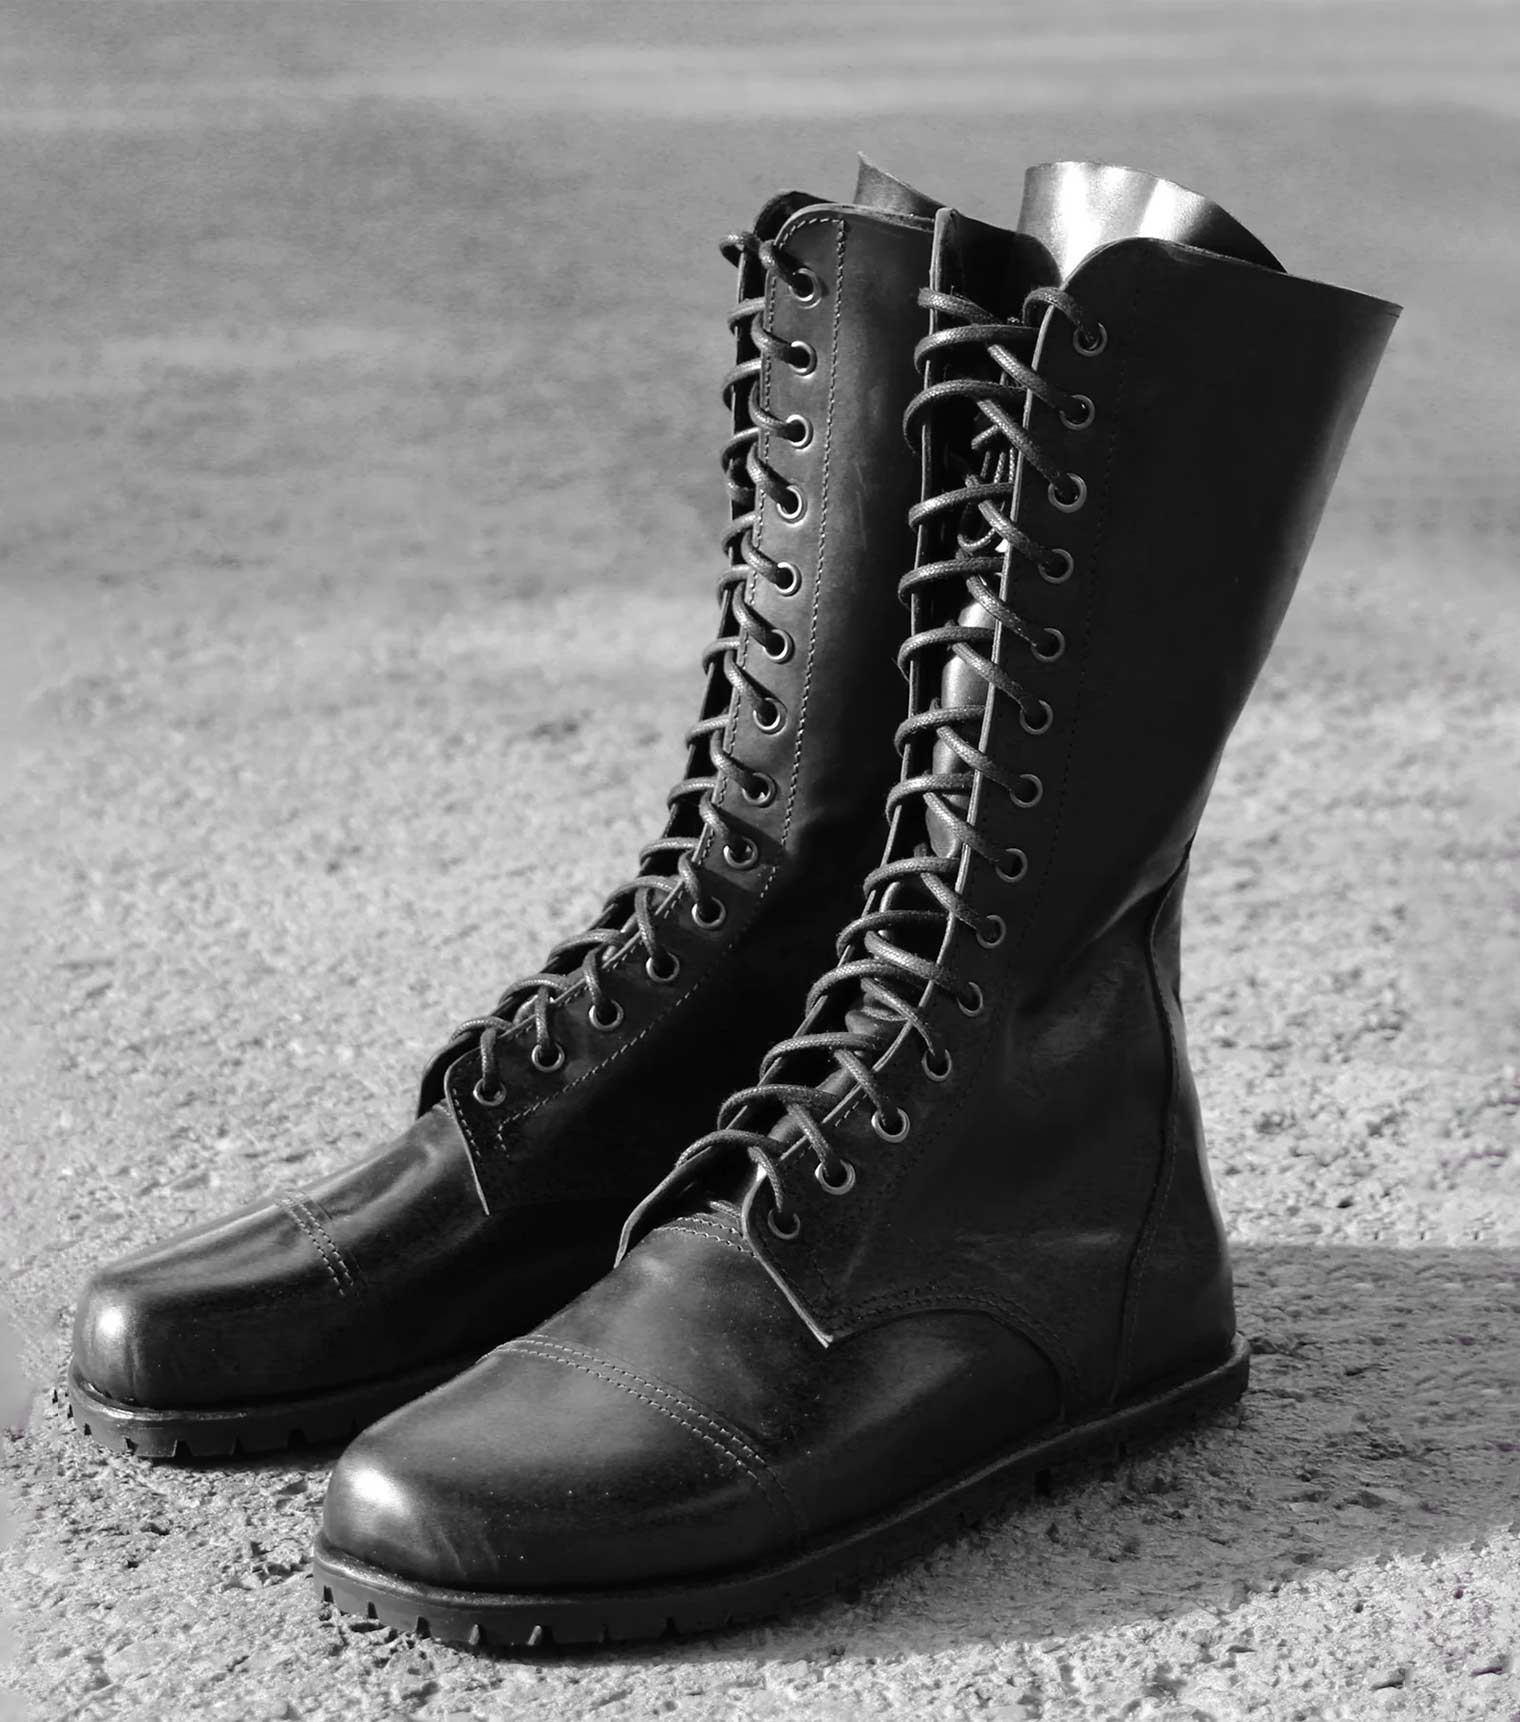 Made to Order Barefoot Kombat Boots with Laced Fastenings